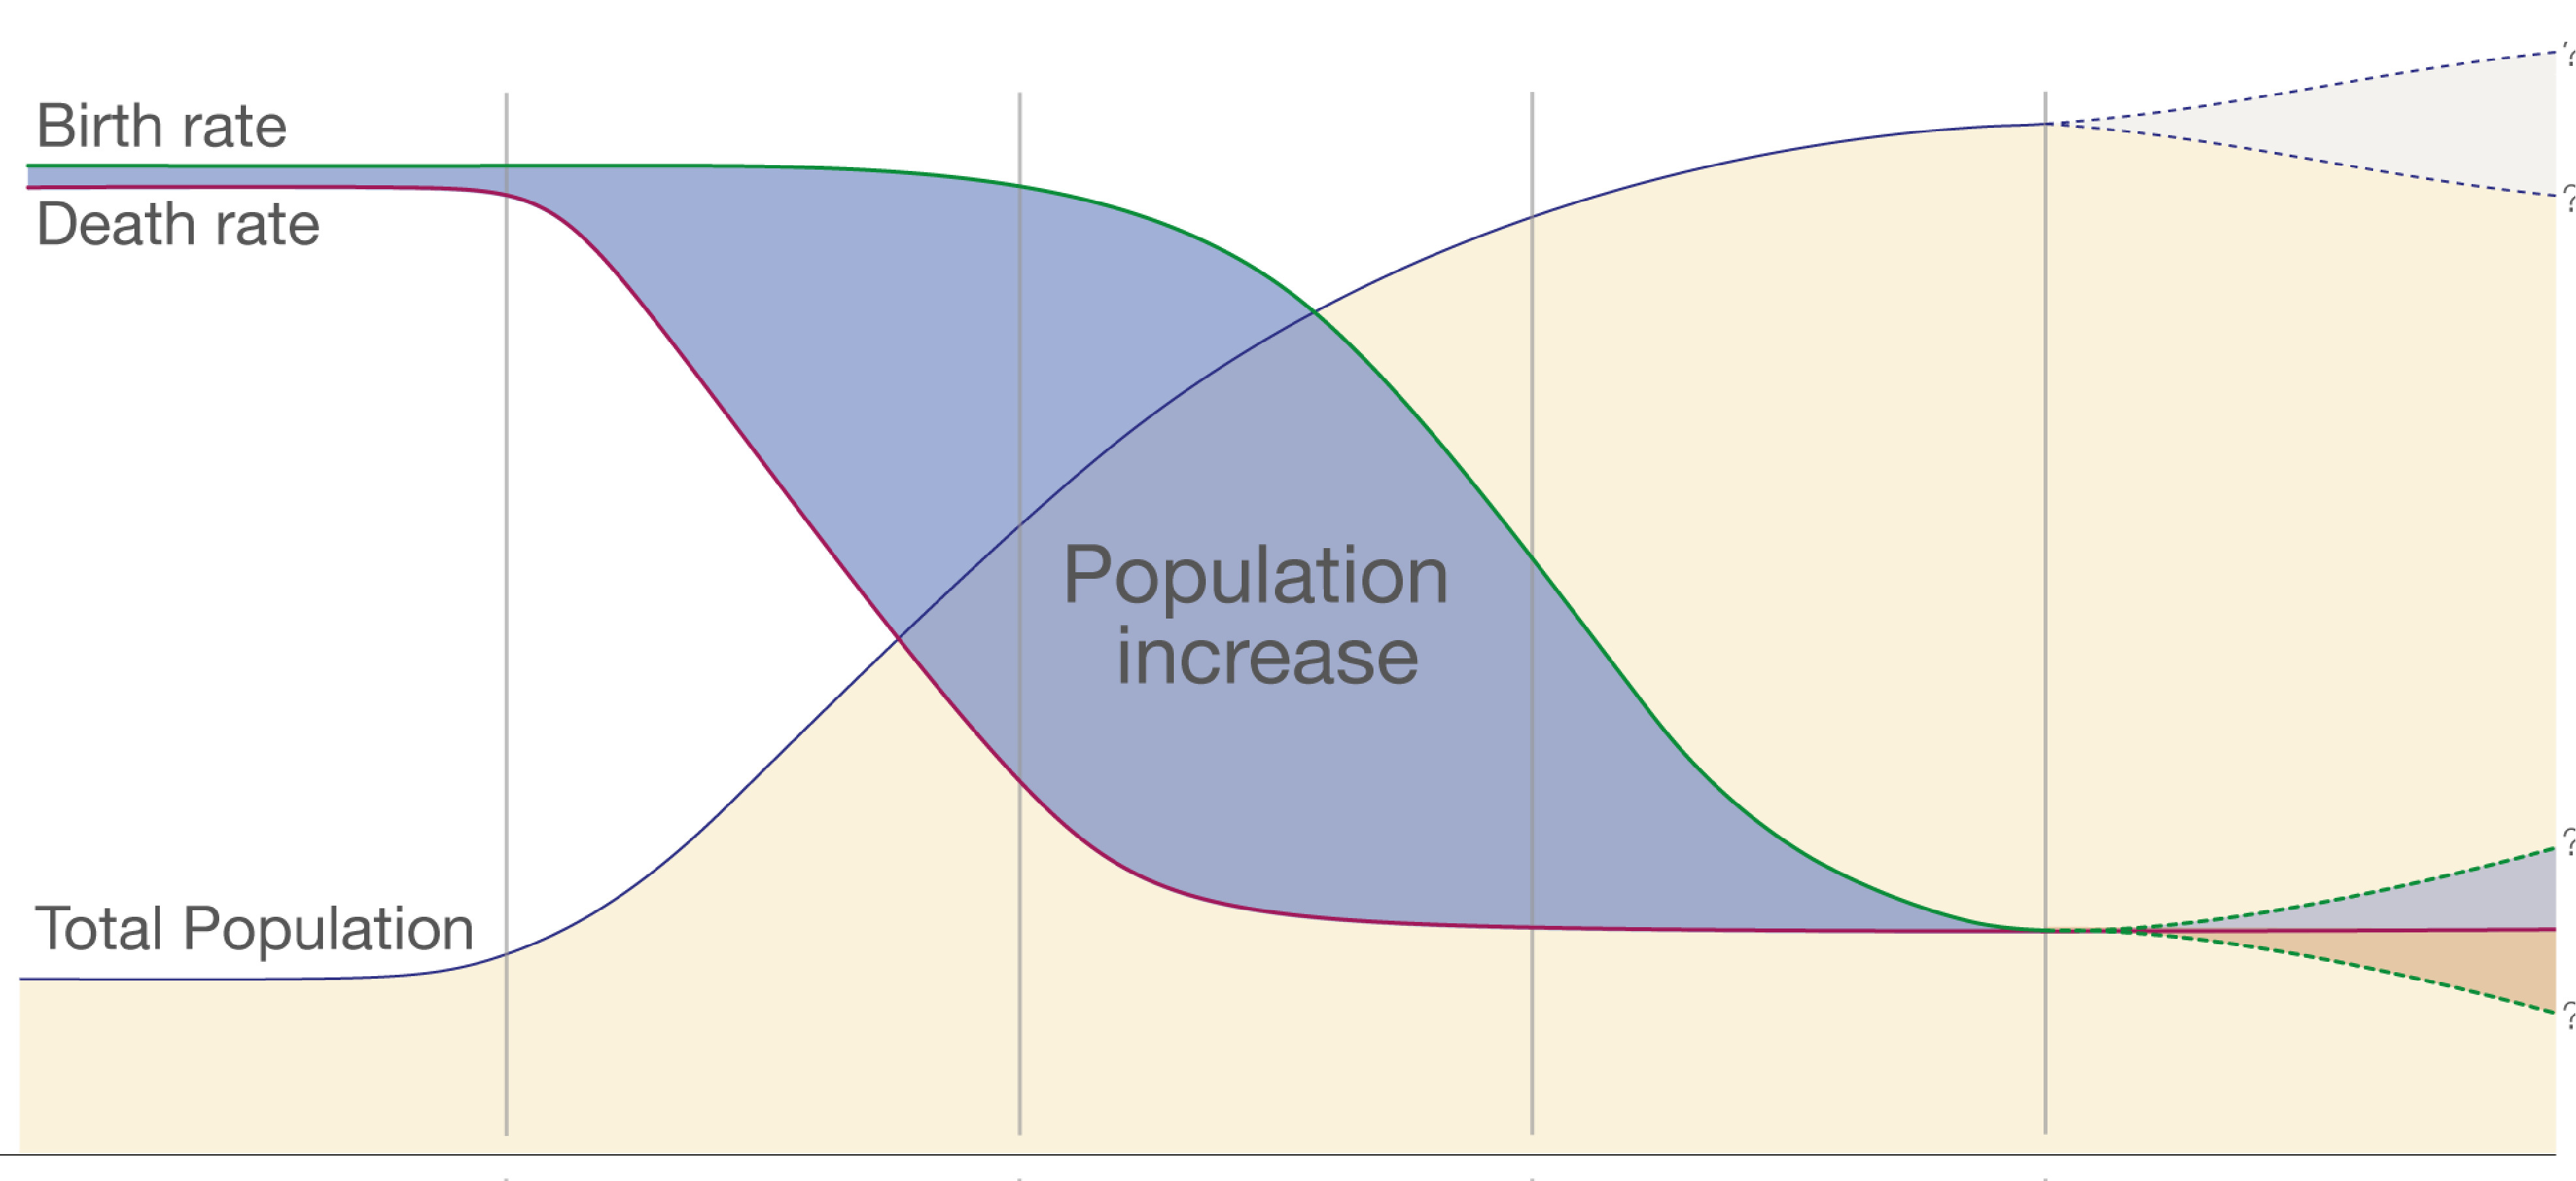 14-astounding-facts-about-demographic-transition-model